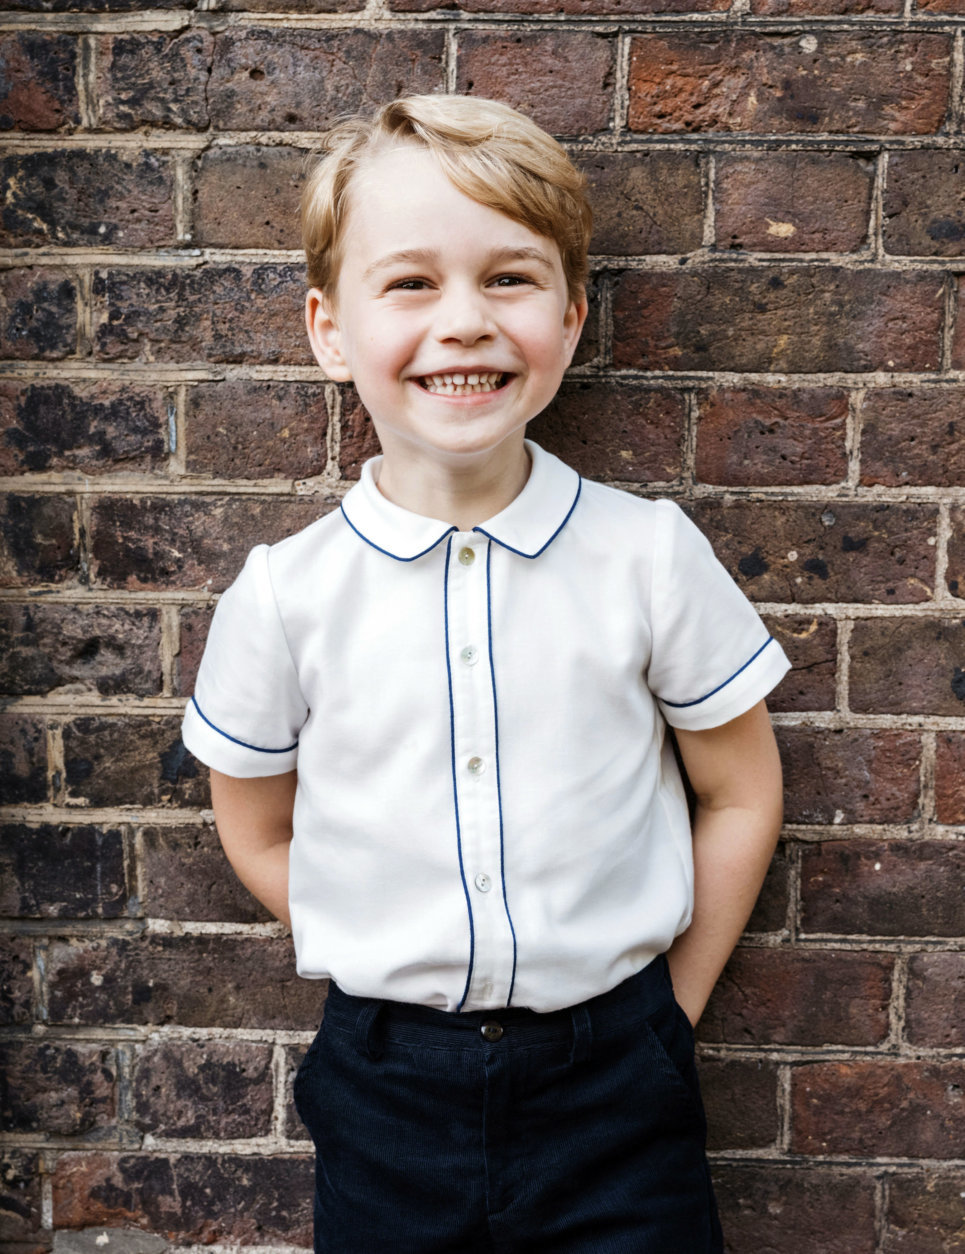 In this photo taken on Monday, July 9, 2018, Britain's Prince George poses for a picture following the christening of his brother Prince Louis, at Clarence House in London. Britain's Prince William and Kate, Duchess of Cambridge have released a photo of Prince George to mark his fifth birthday on Sunday, July 22. (Matt Porteous via AP)